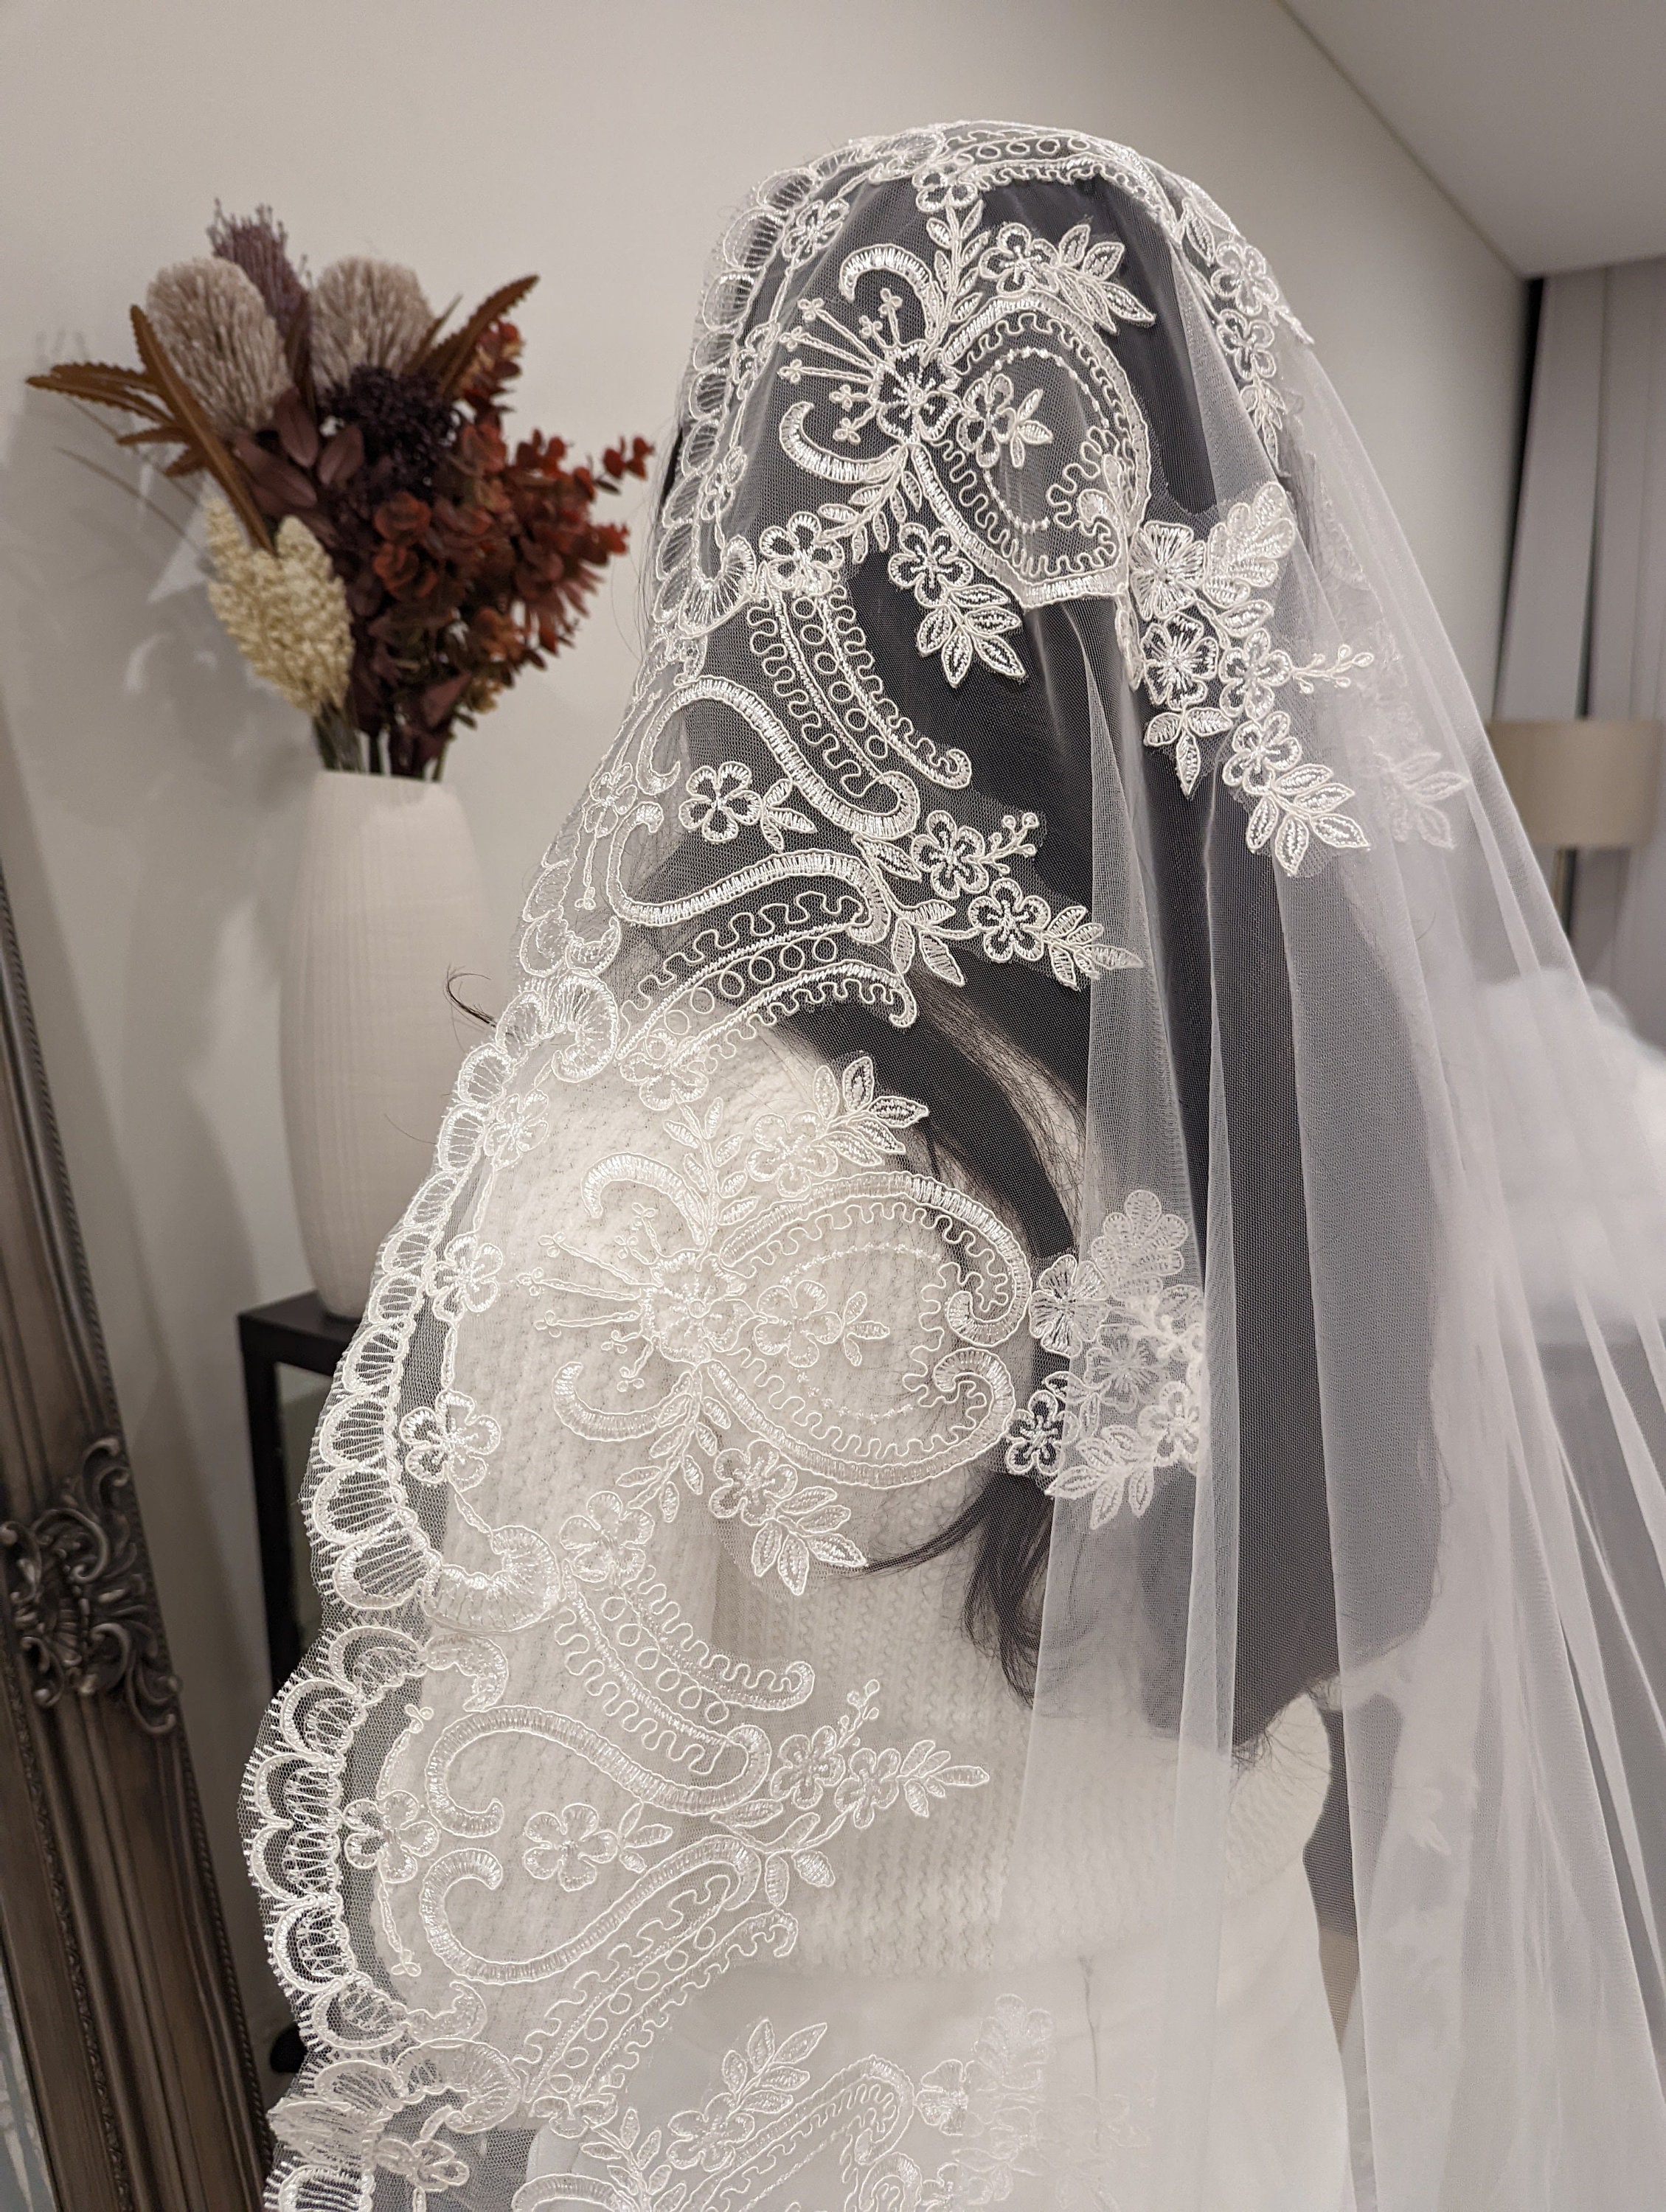 SINDALU 90 Chapel Length Veil,Champagne Tulle Wedding Veil with  Pearls,Floral Lace Veil,Cathedral Bridal Veil with Comb,Pearl Lace Veil,Beaded  Veil 